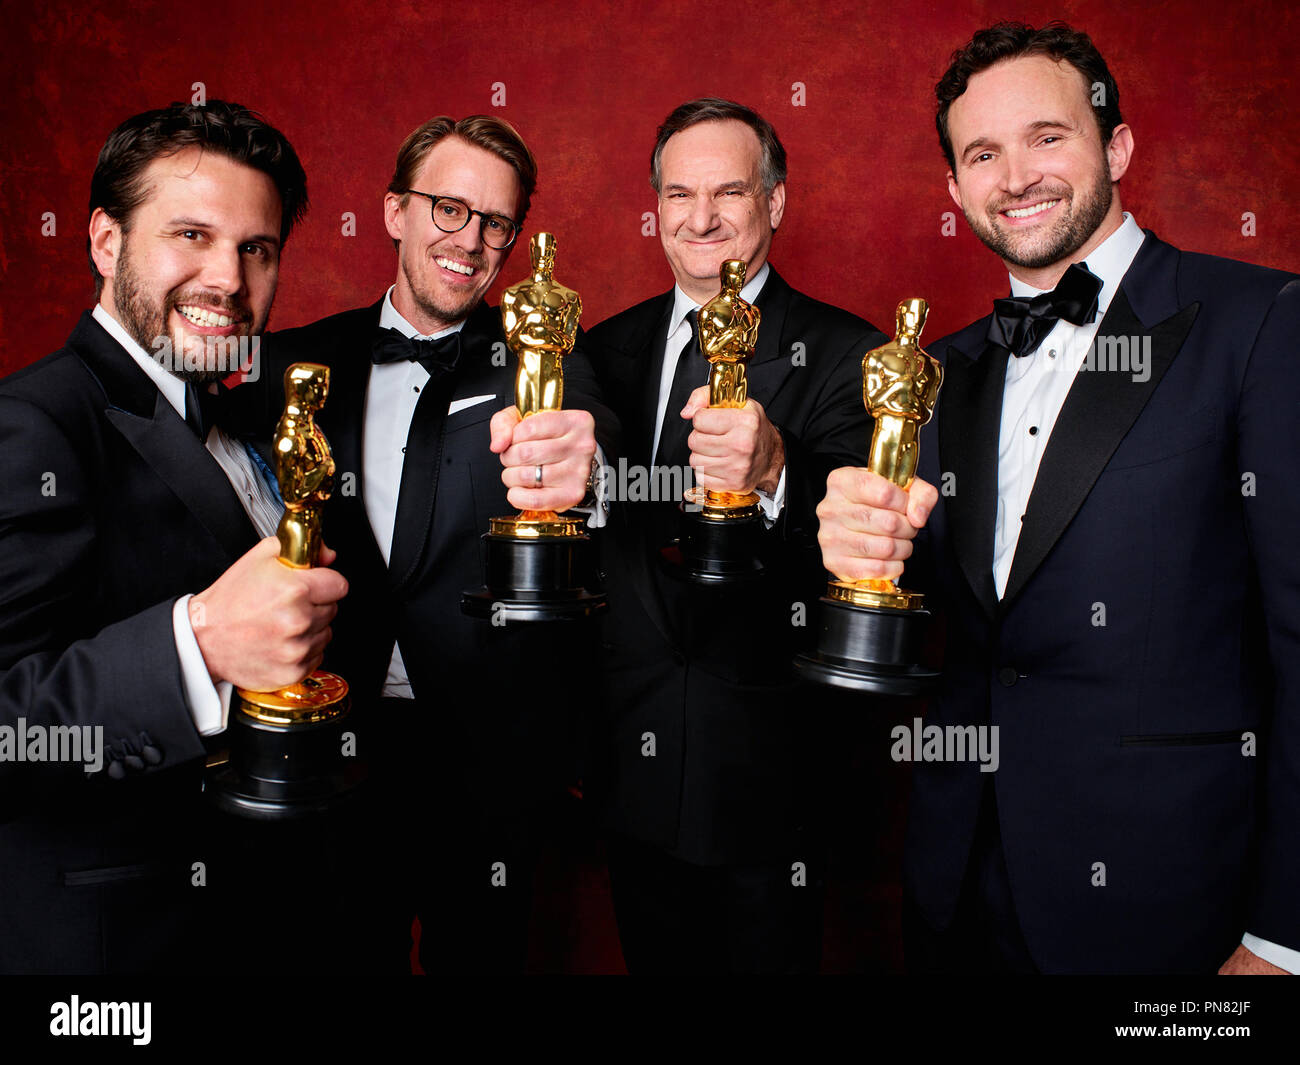 Adam Valdez, Andrew R. Jones, Robert Legato and Dan Lemmon pose backstage with the Oscar® for Achievement in visual effects, for work on “The Jungle Book” during the live ABC Telecast of The 89th Oscars® at the Dolby® Theatre in Hollywood, CA on Sunday, February 26, 2016.  File Reference # 33242_744THA  For Editorial Use Only -  All Rights Reserved Stock Photo